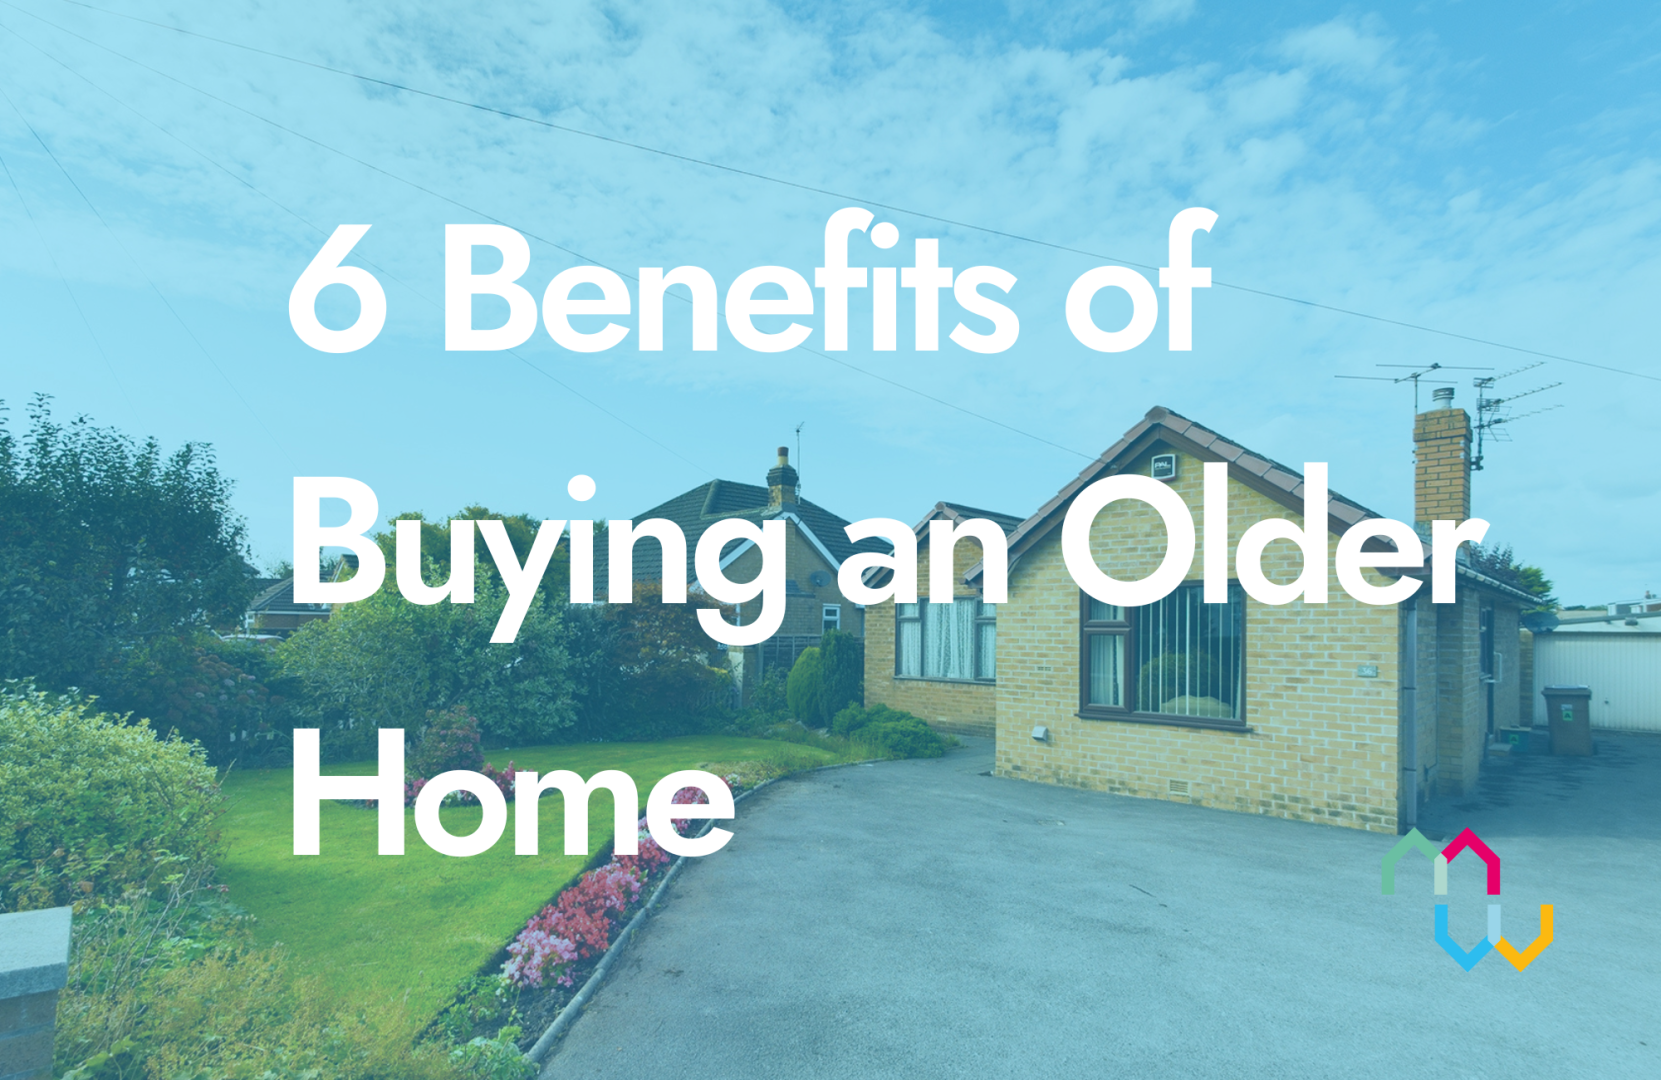 6 Benefits of Buying an Older Home